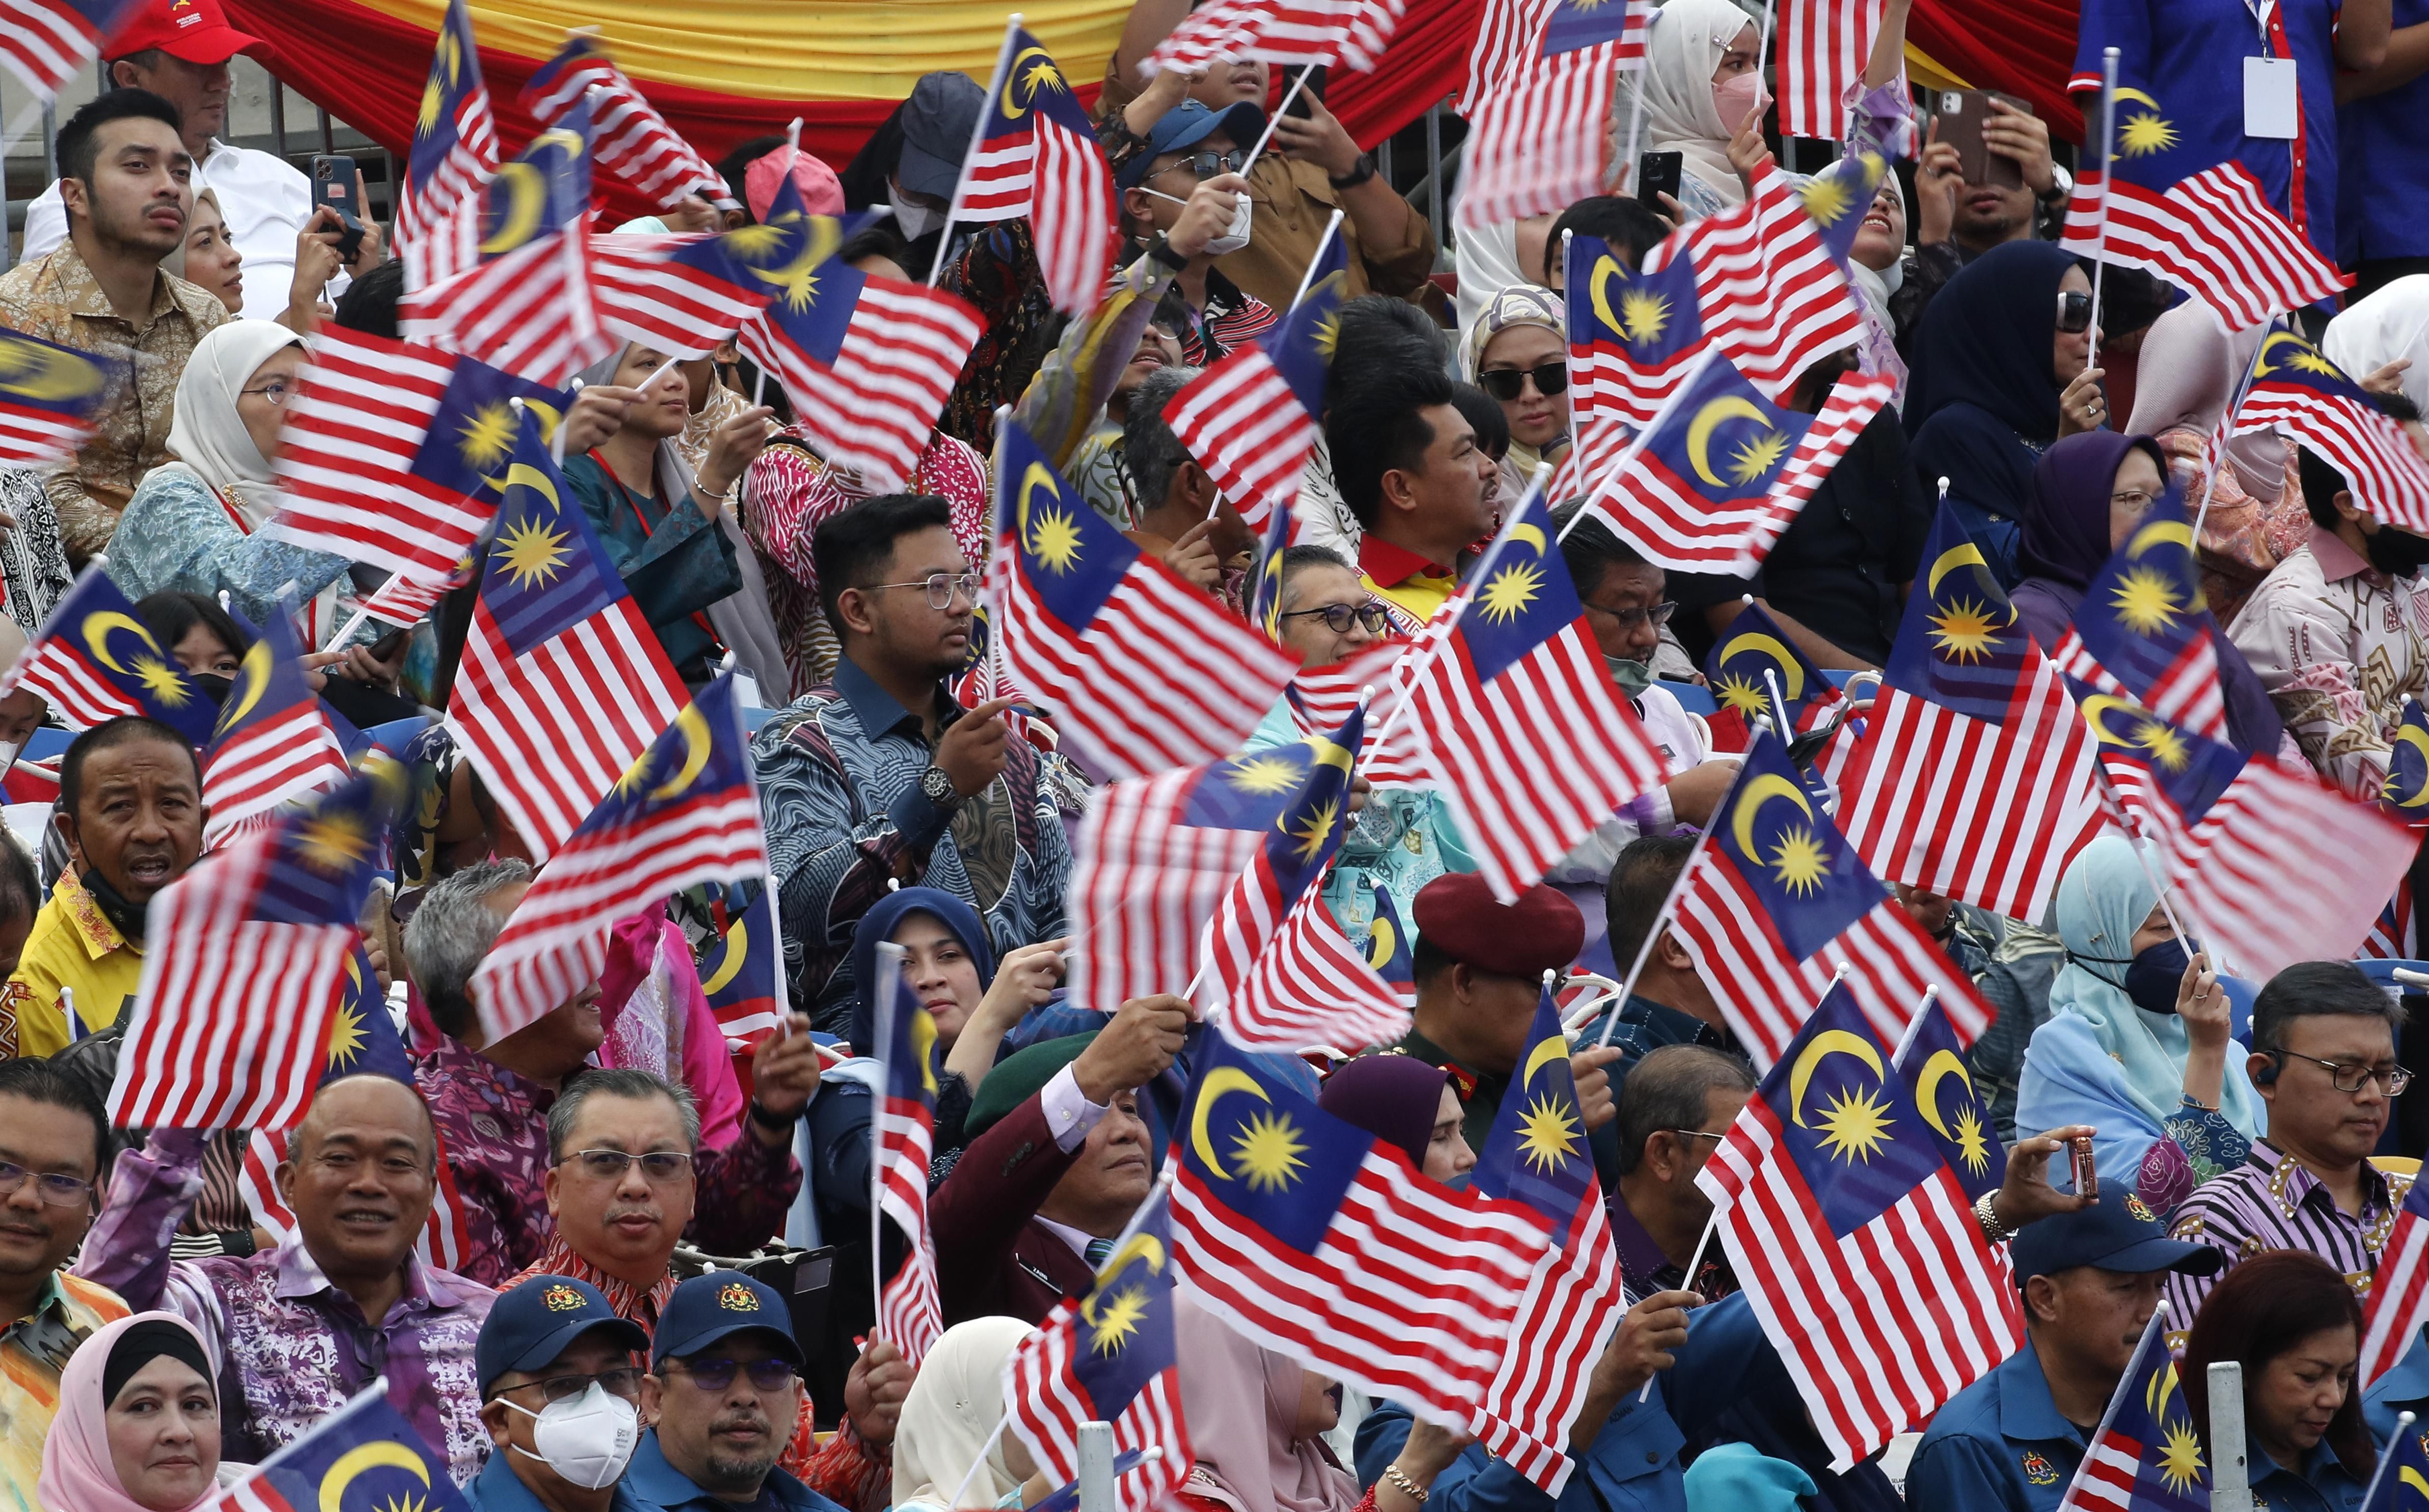 Malaysians wave flags during the 65th National Day celebrations parade in Kuala Lumpur.